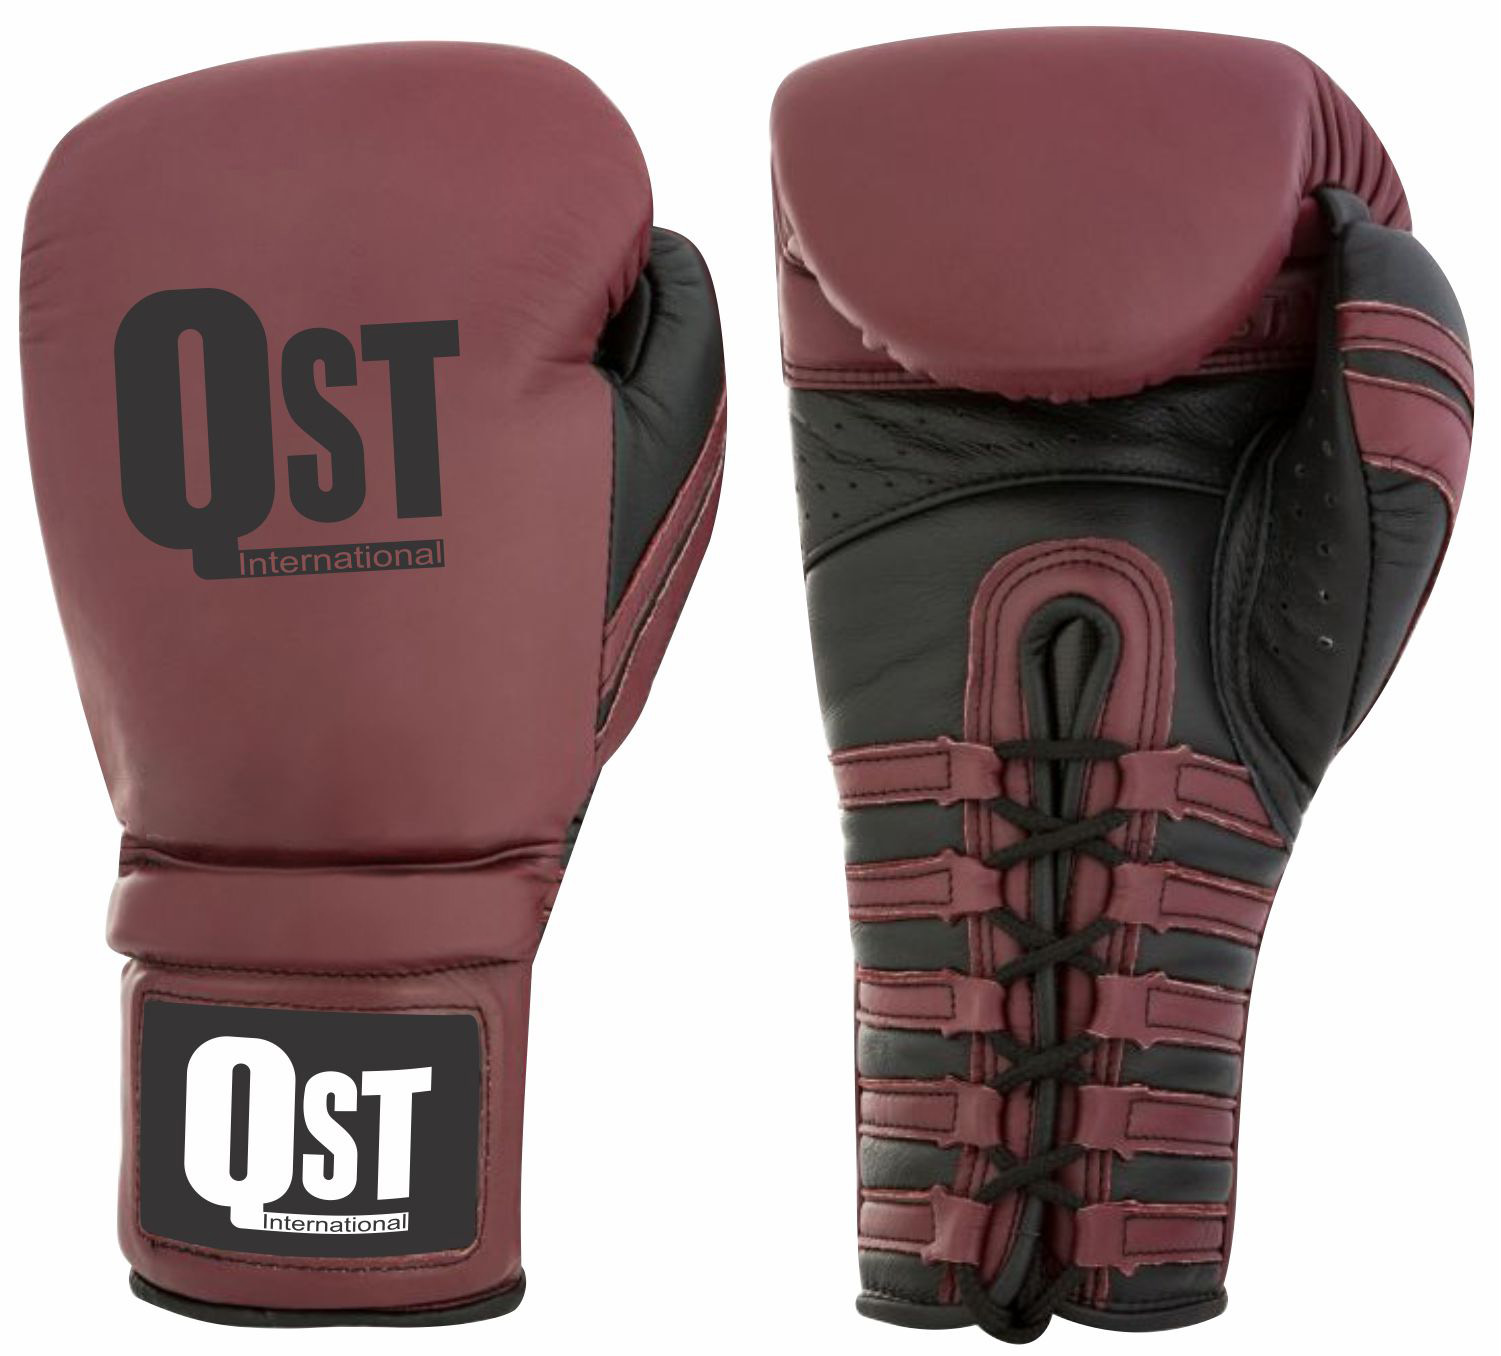 Lace up Boxing Gloves - PRG-3260